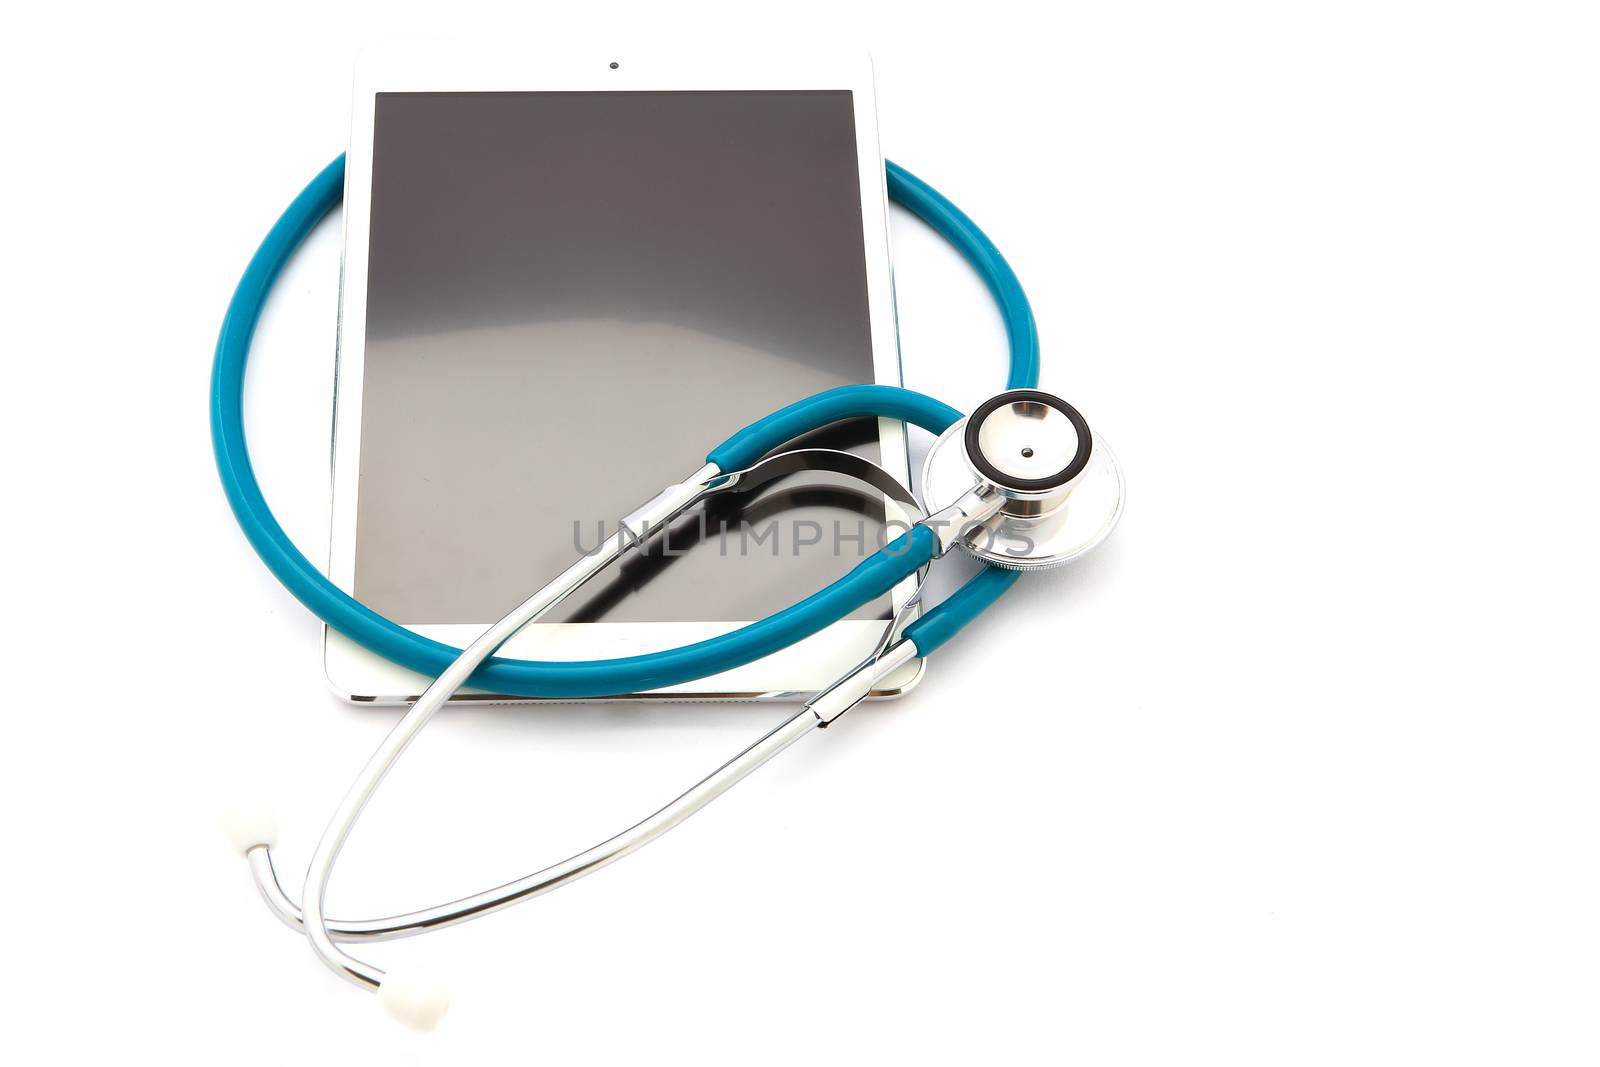 Tablet Computer With  Stethoscope, Isolated On White Background by rufous